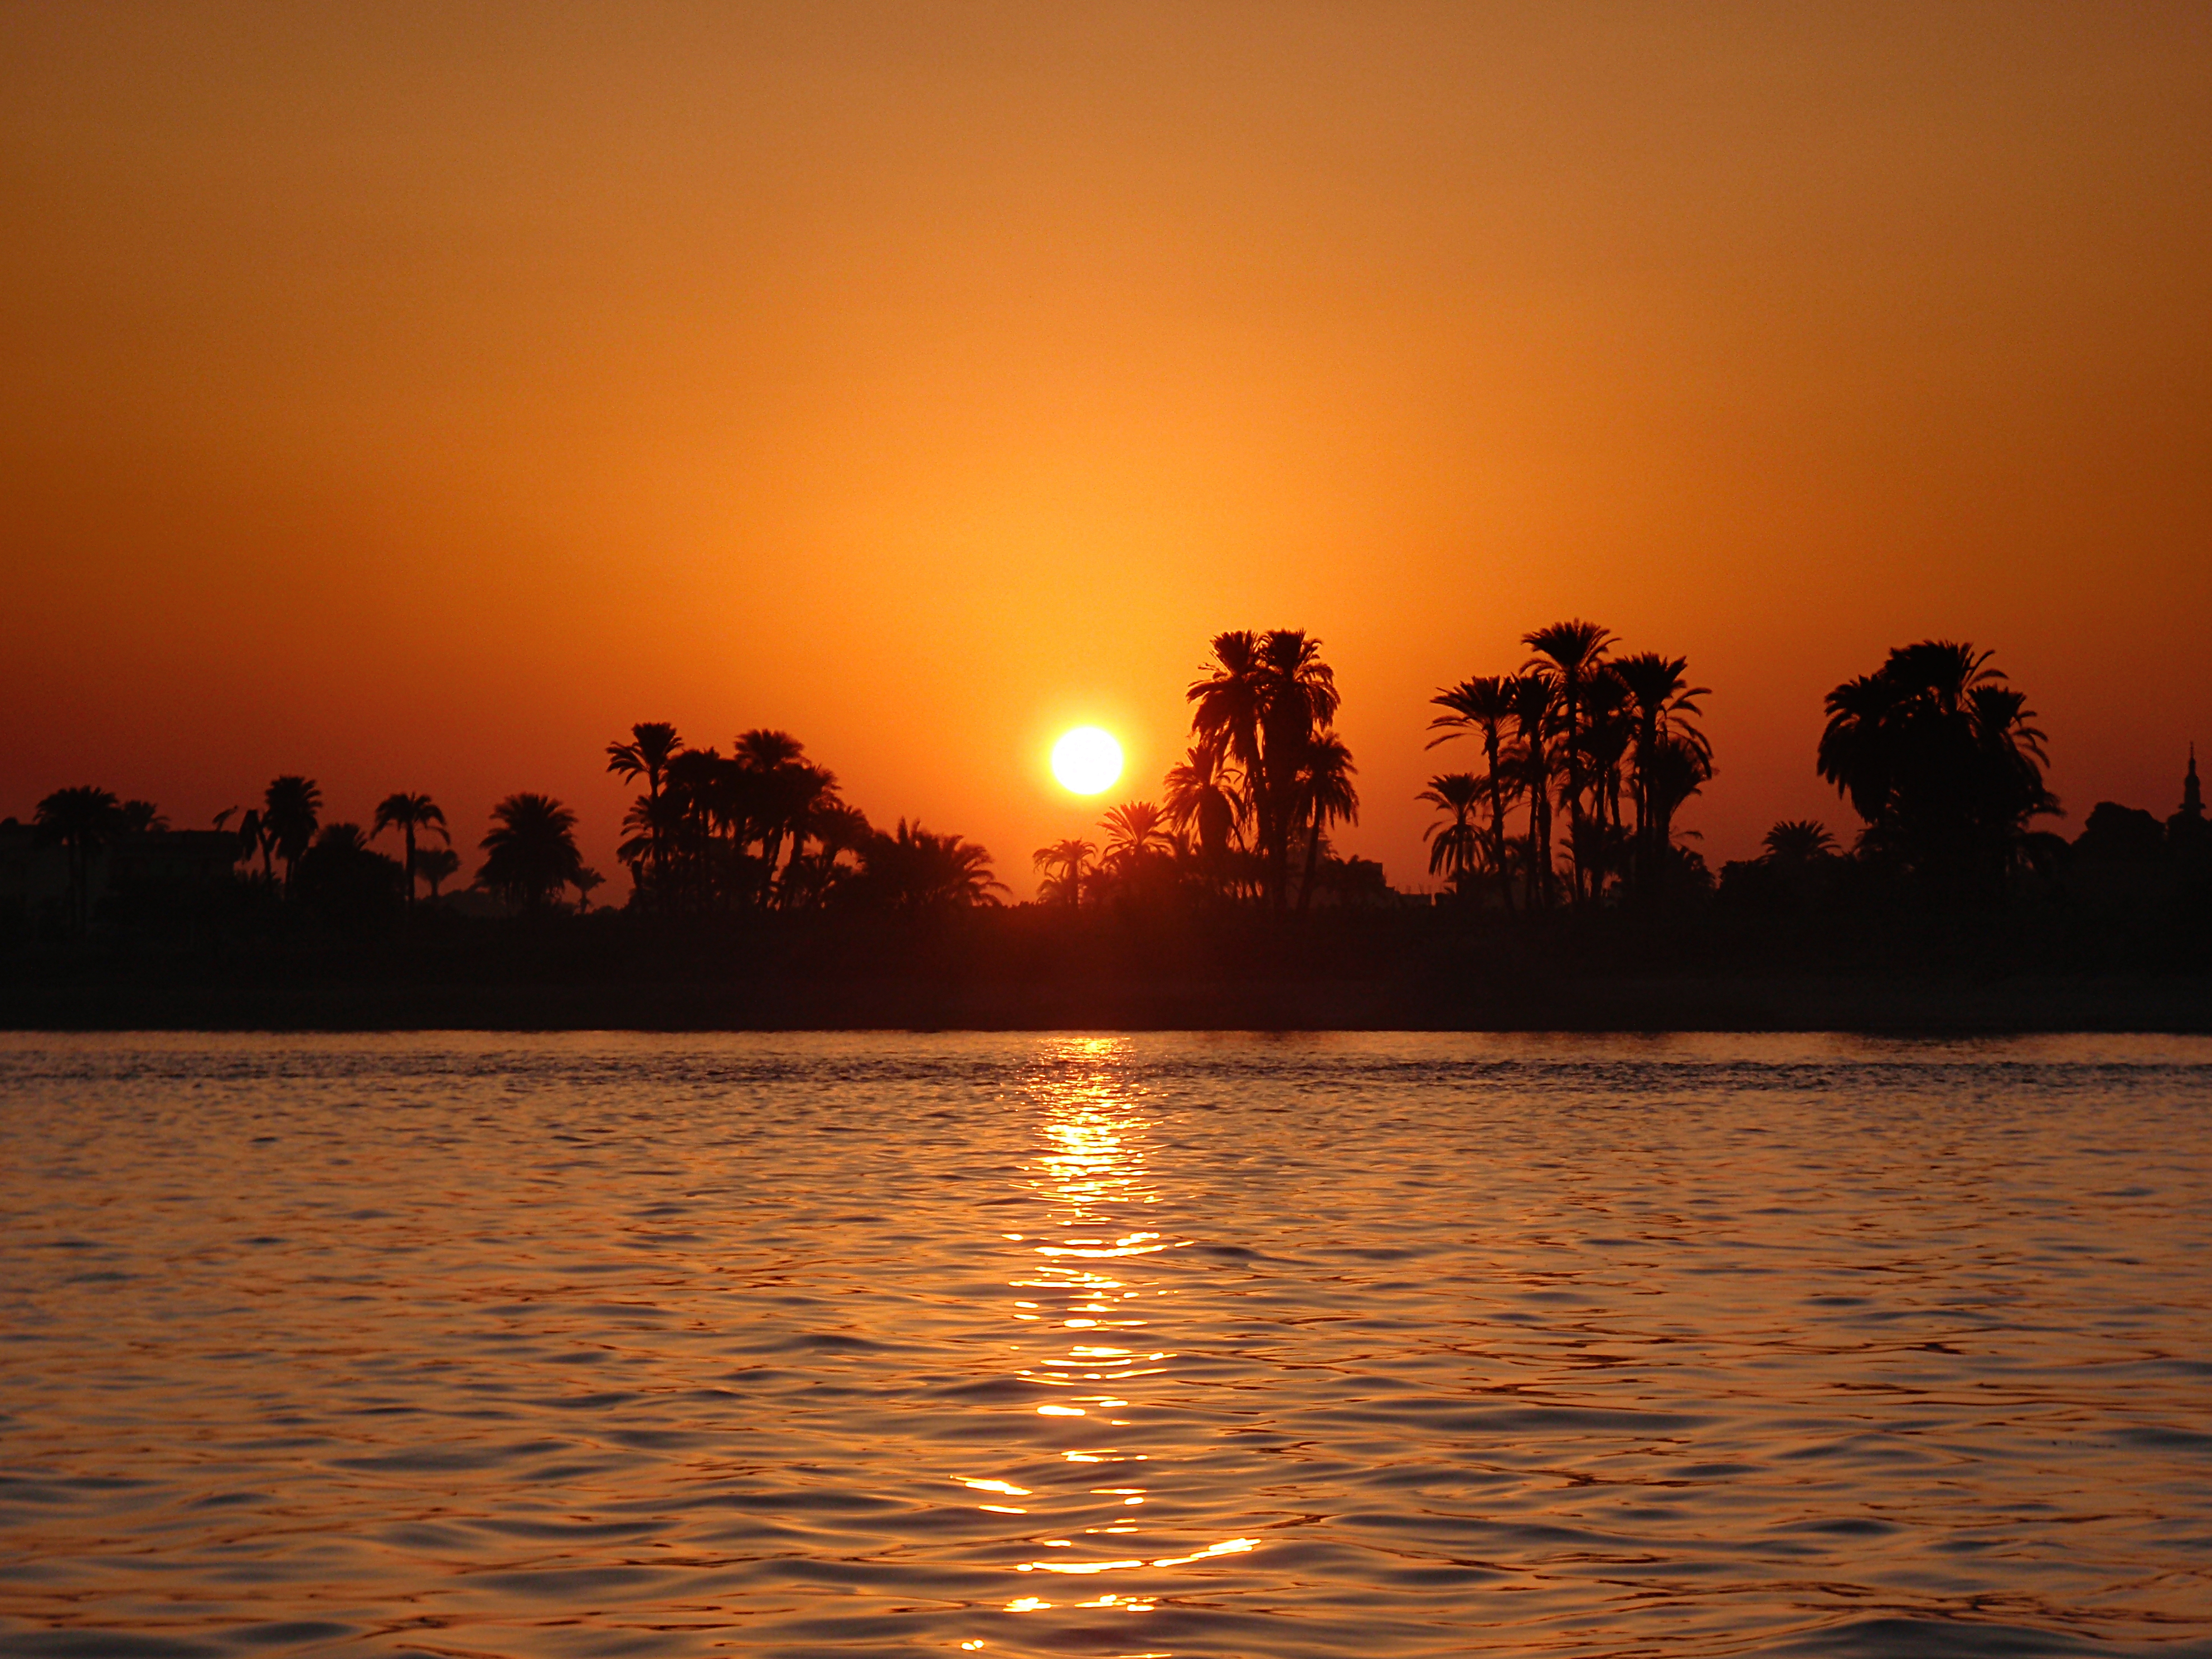 Wallpaper, trip, travel, trees, sunset, vacation, orange, Sun, holiday, reflection, tree, history, water, beautiful, river, boats, photography, boat, photo, warm, photo, Egypt, palm, Nile, palmtrees, stunning, romantic, historical, Luxor, tranquil